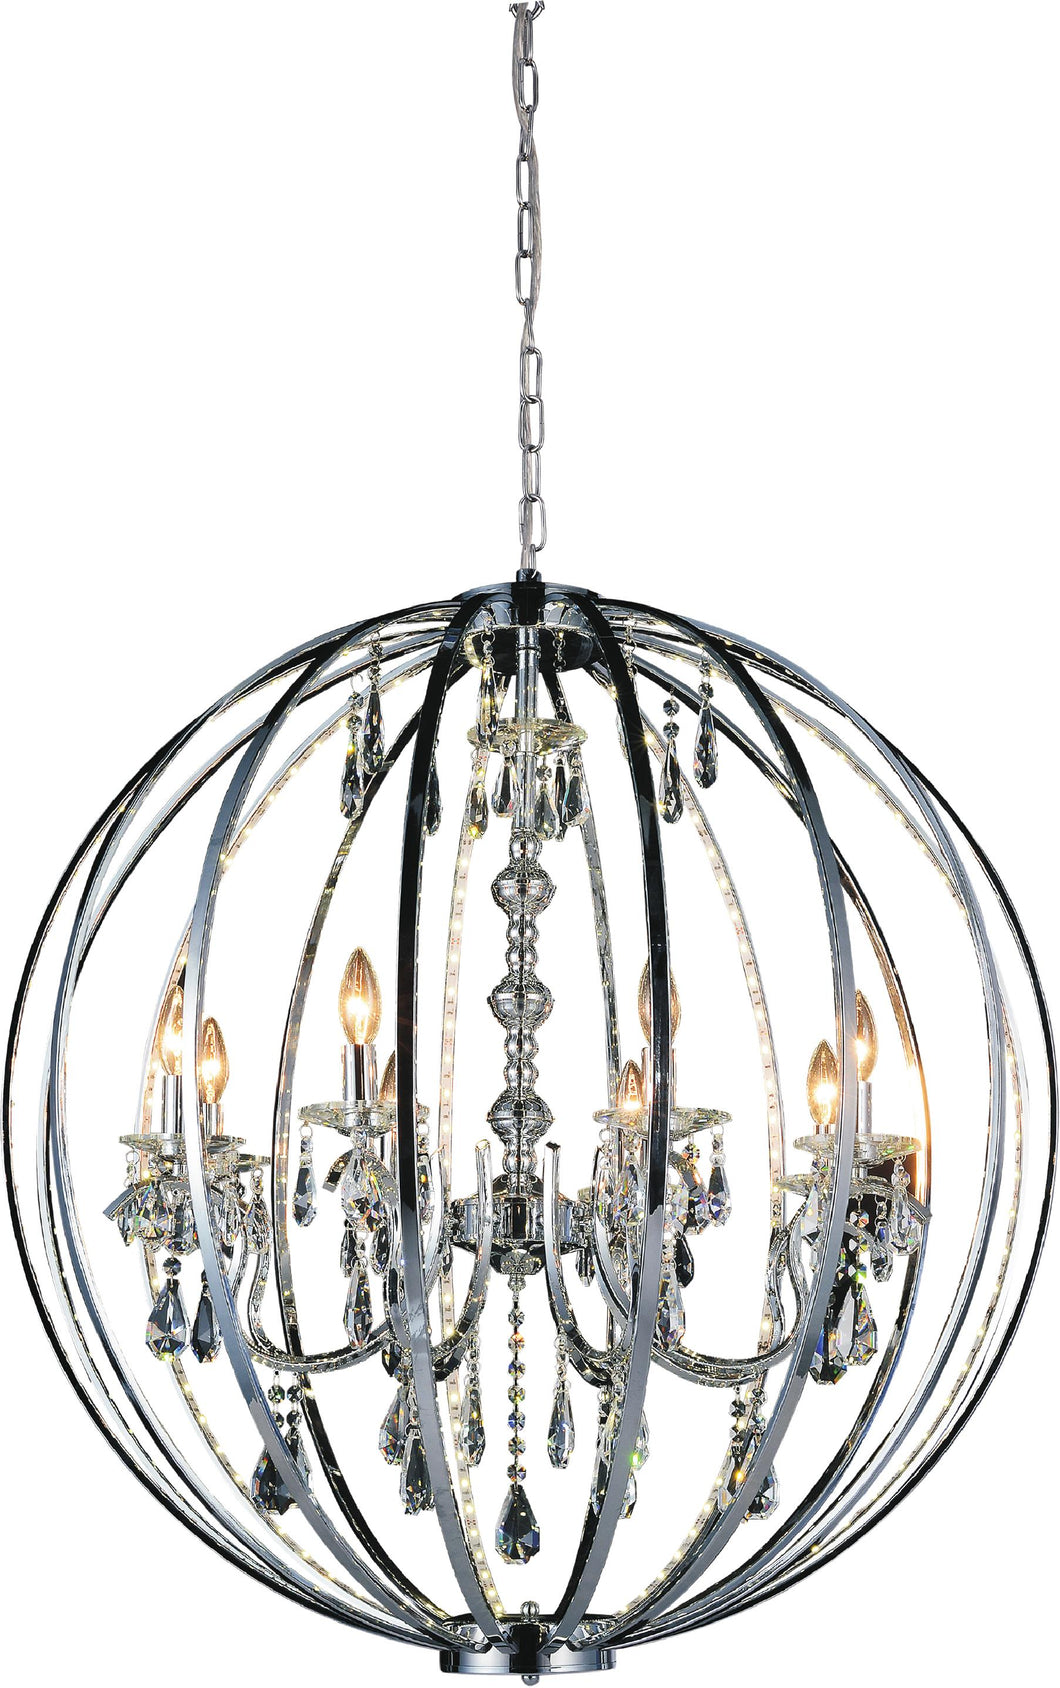 8 Light Up Chandelier with Chrome finish